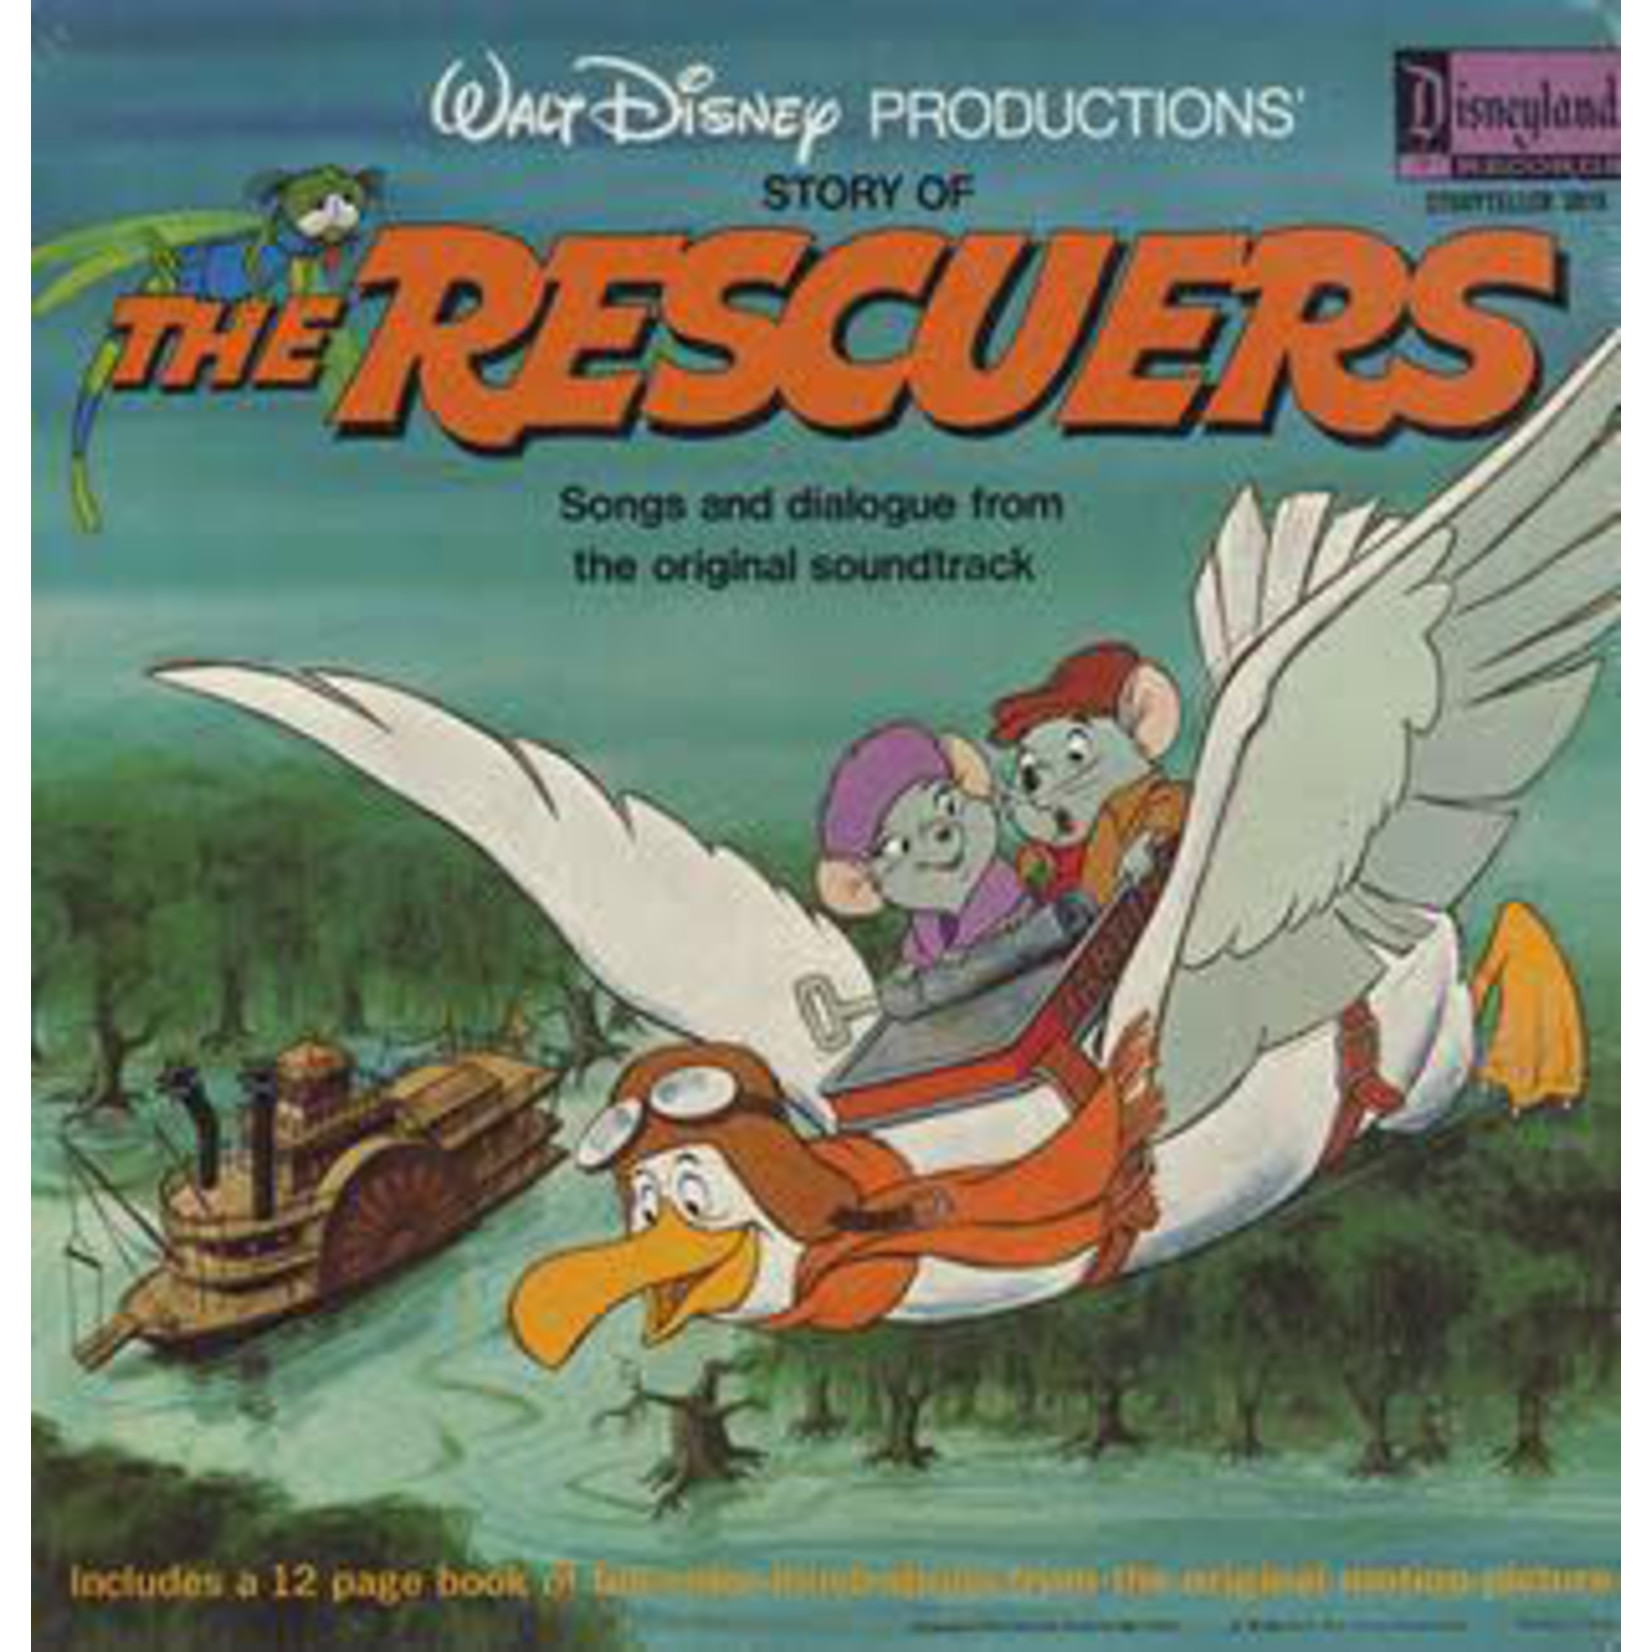 Disney Walt Disney Productions – Story Of The Rescuers (G, 1977, LP, Includes 12-page storybook, Disneyland – 3816)